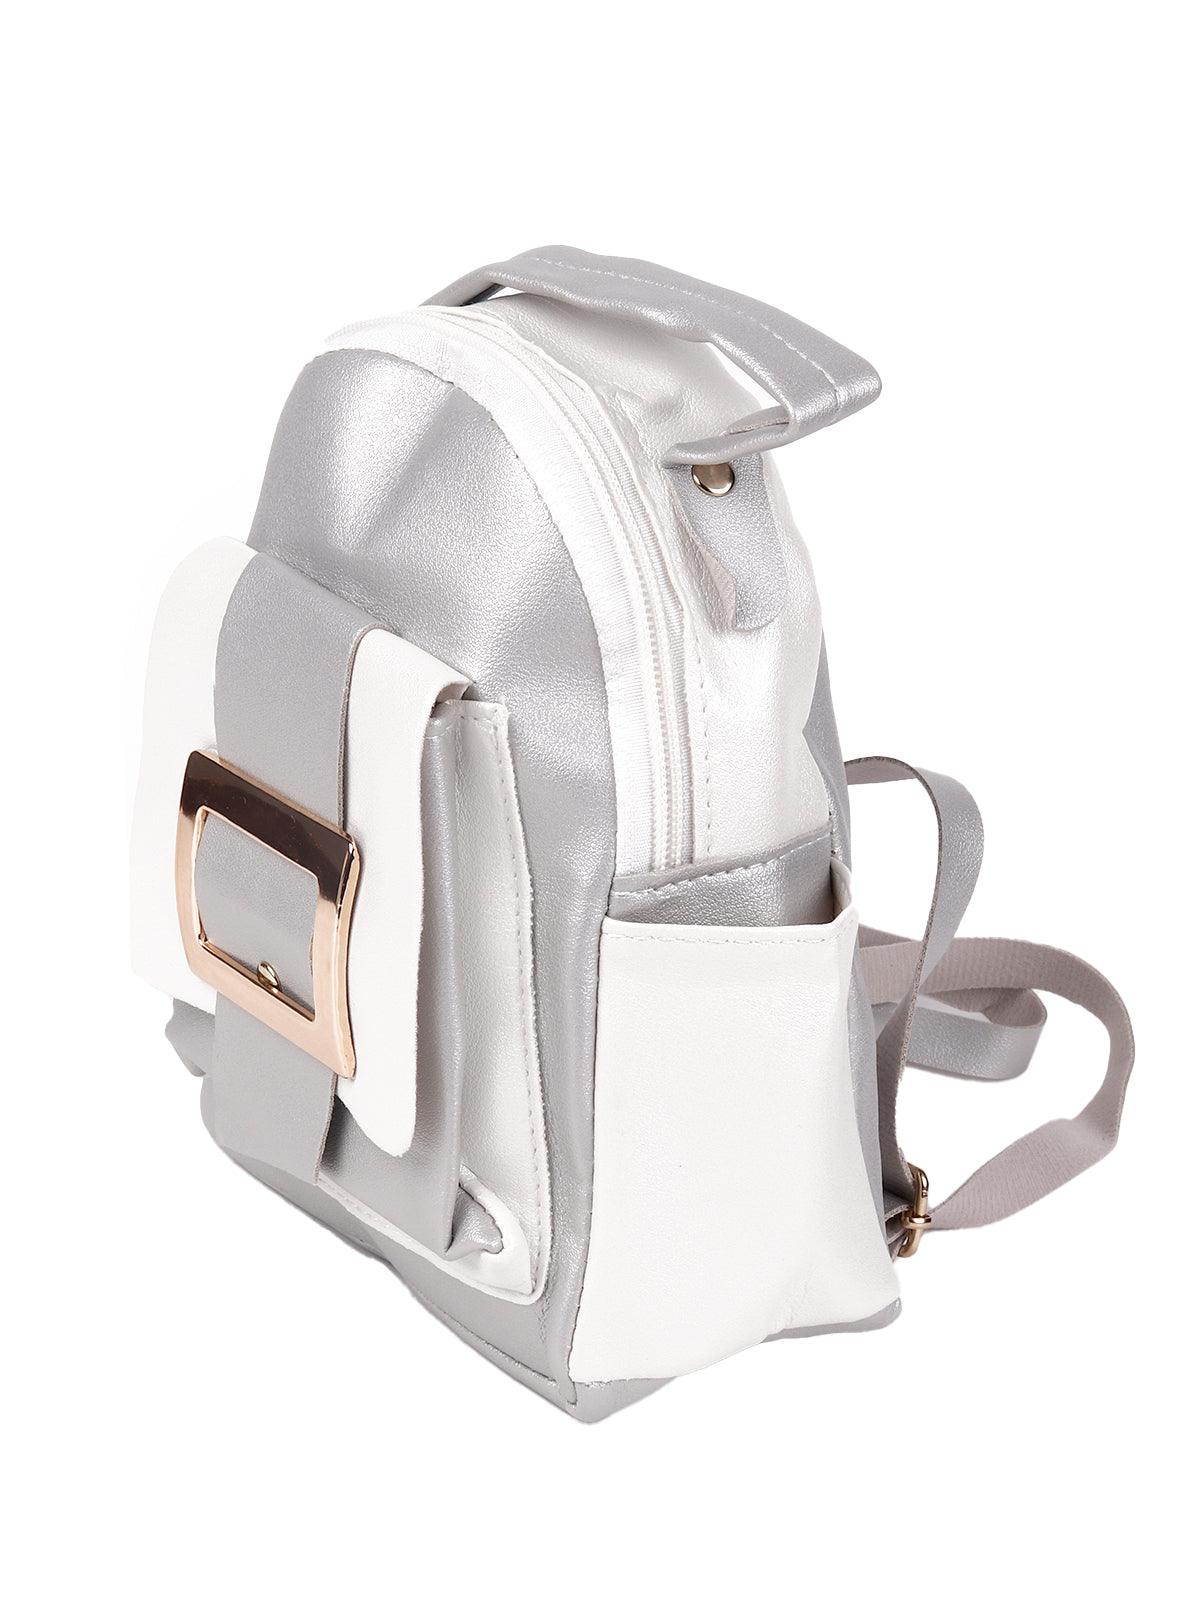 Stunning silver and white bagpack - Odette